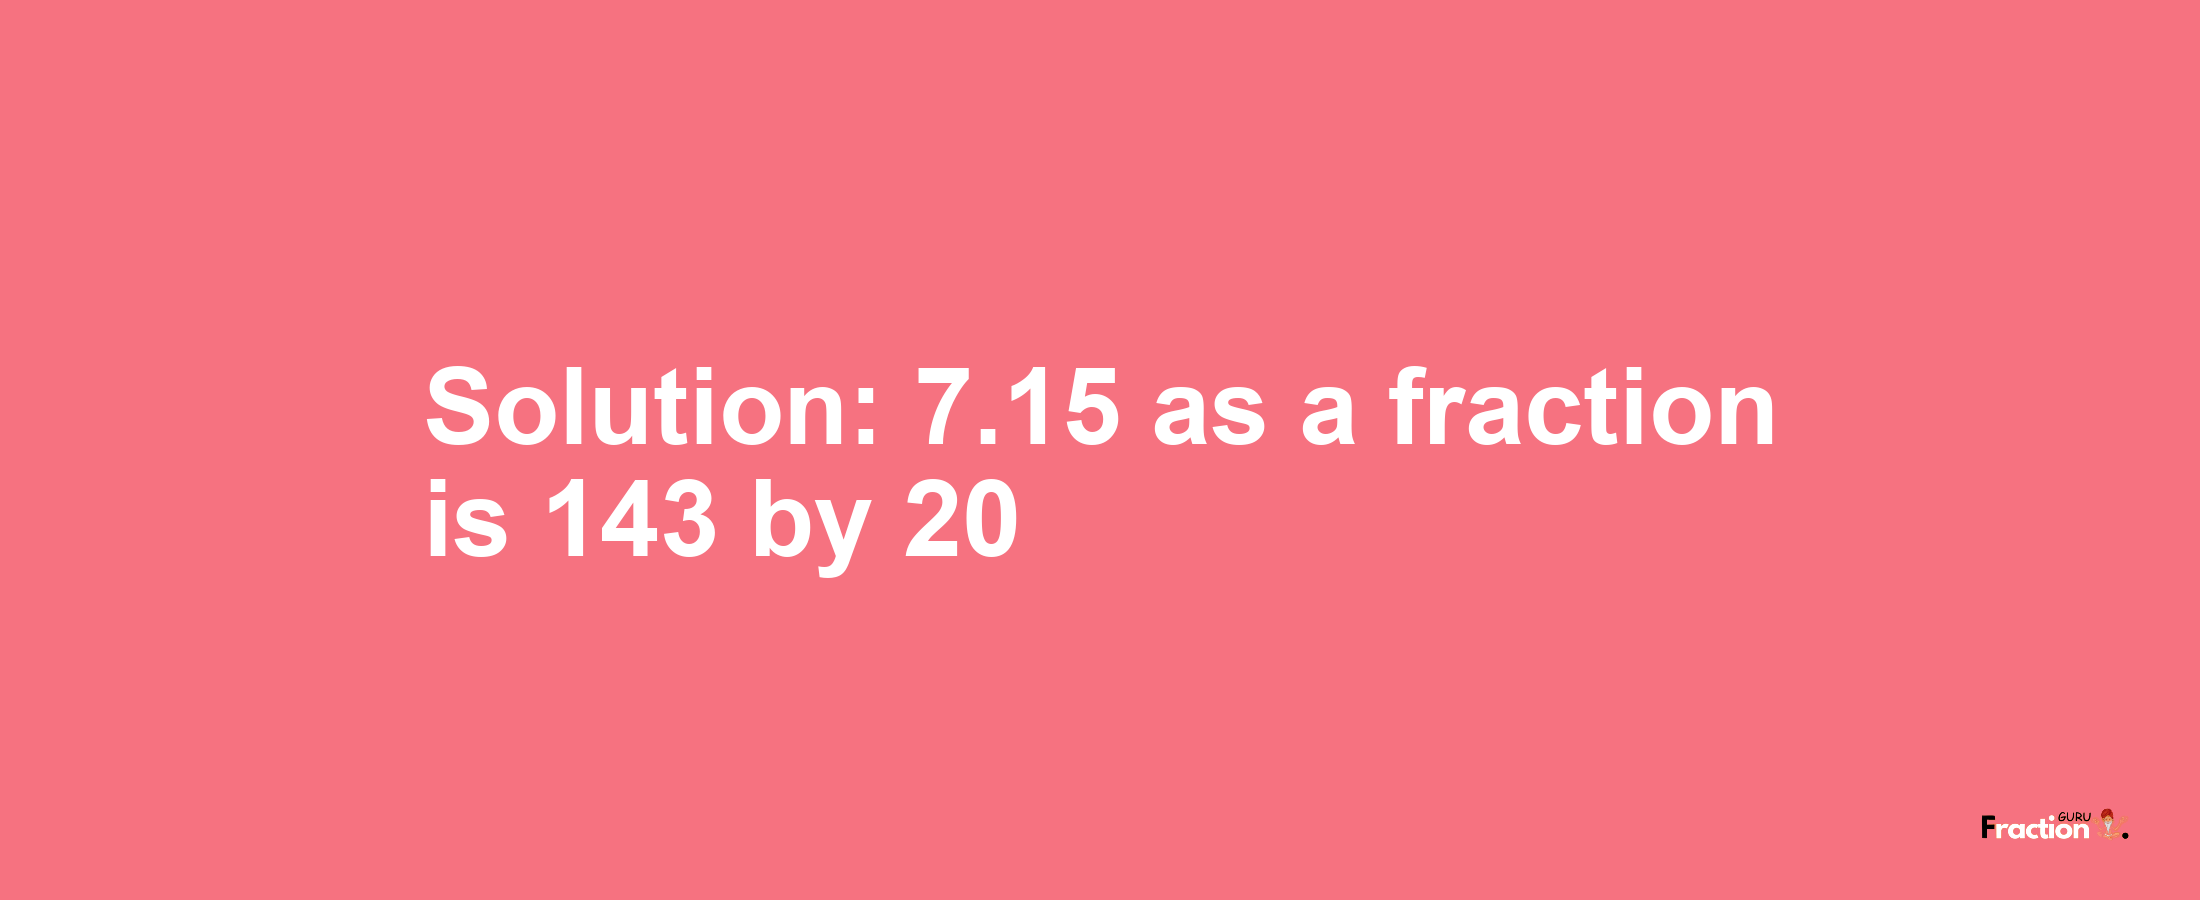 Solution:7.15 as a fraction is 143/20